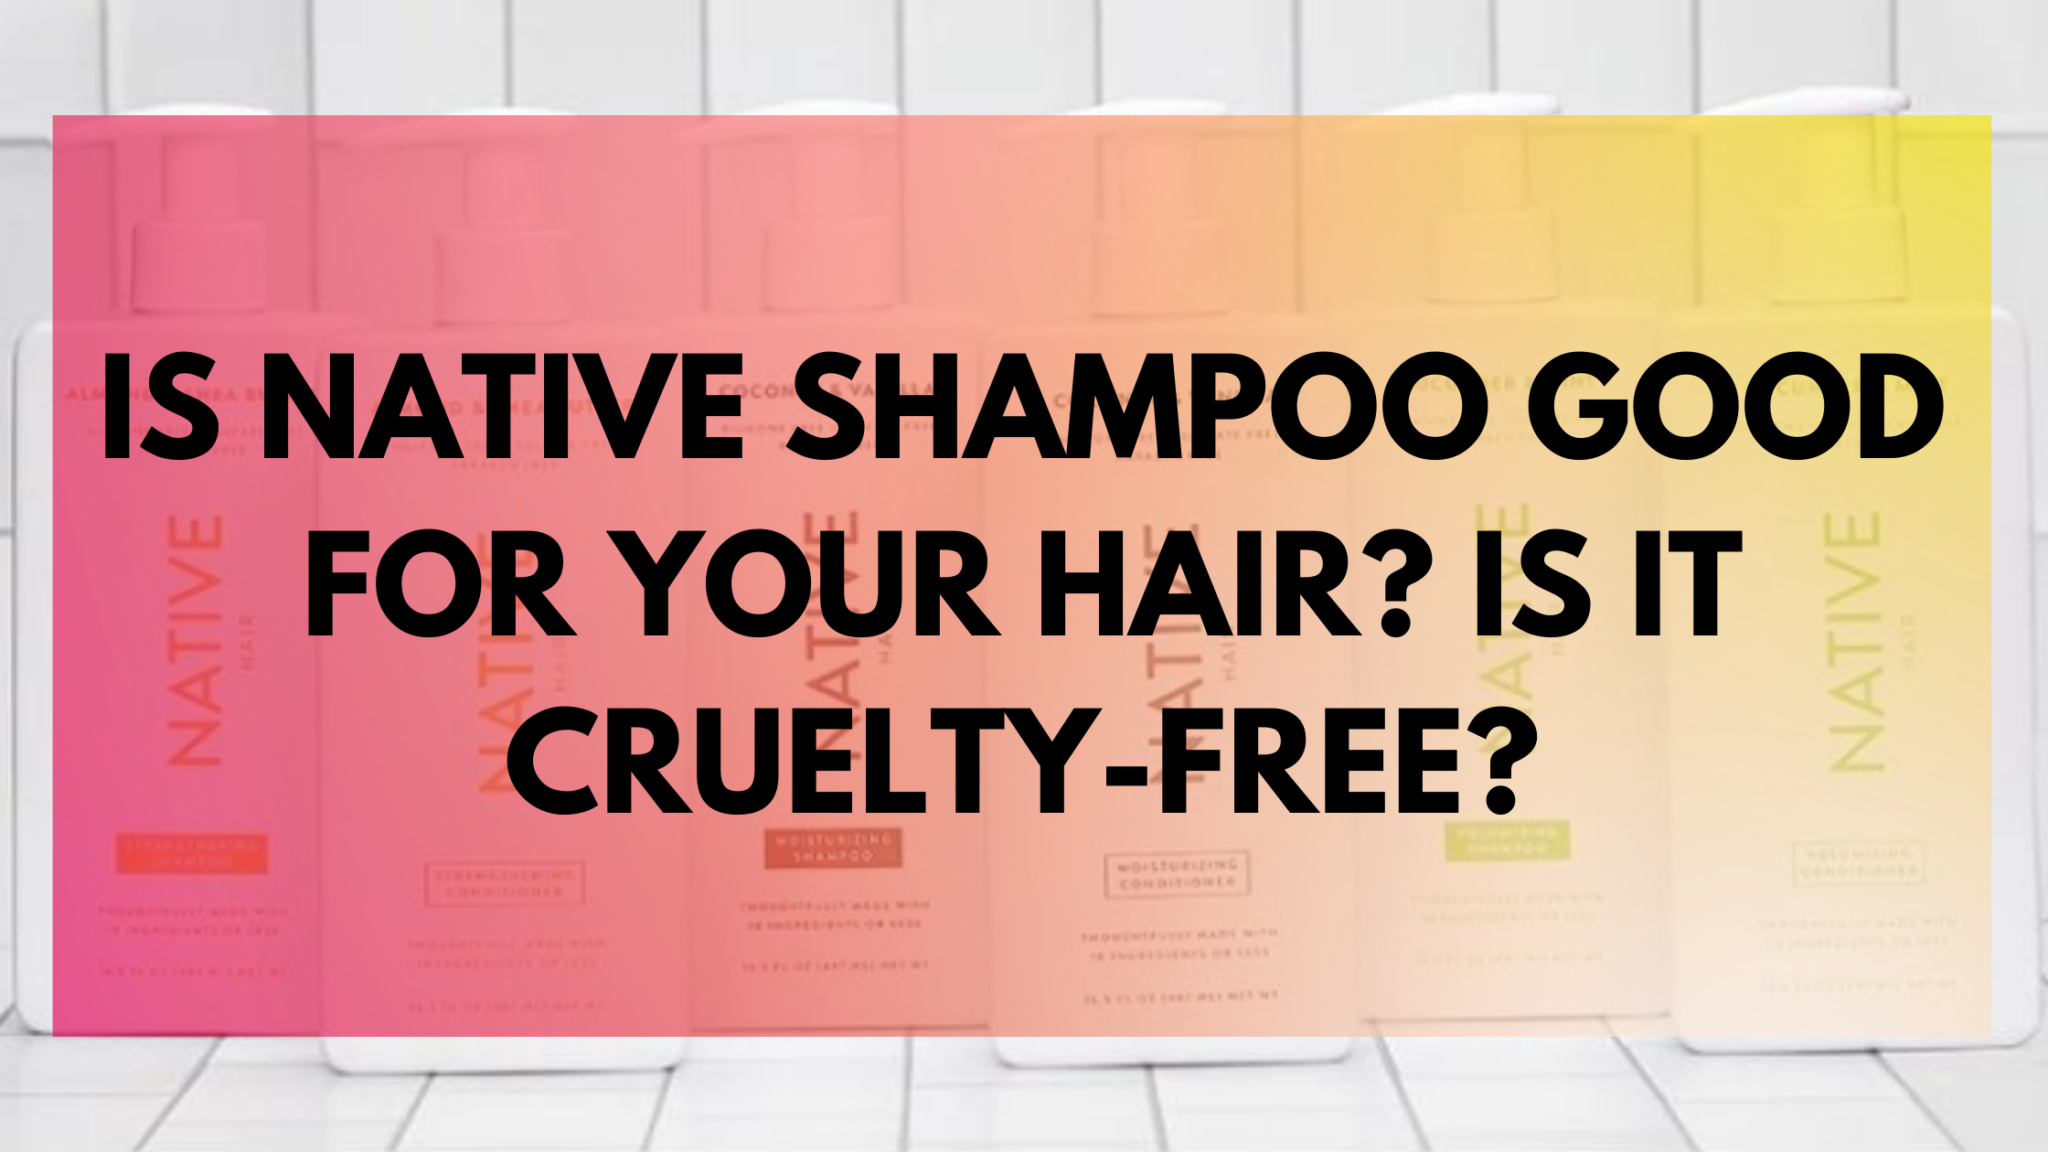 is native shampoo good for your hair